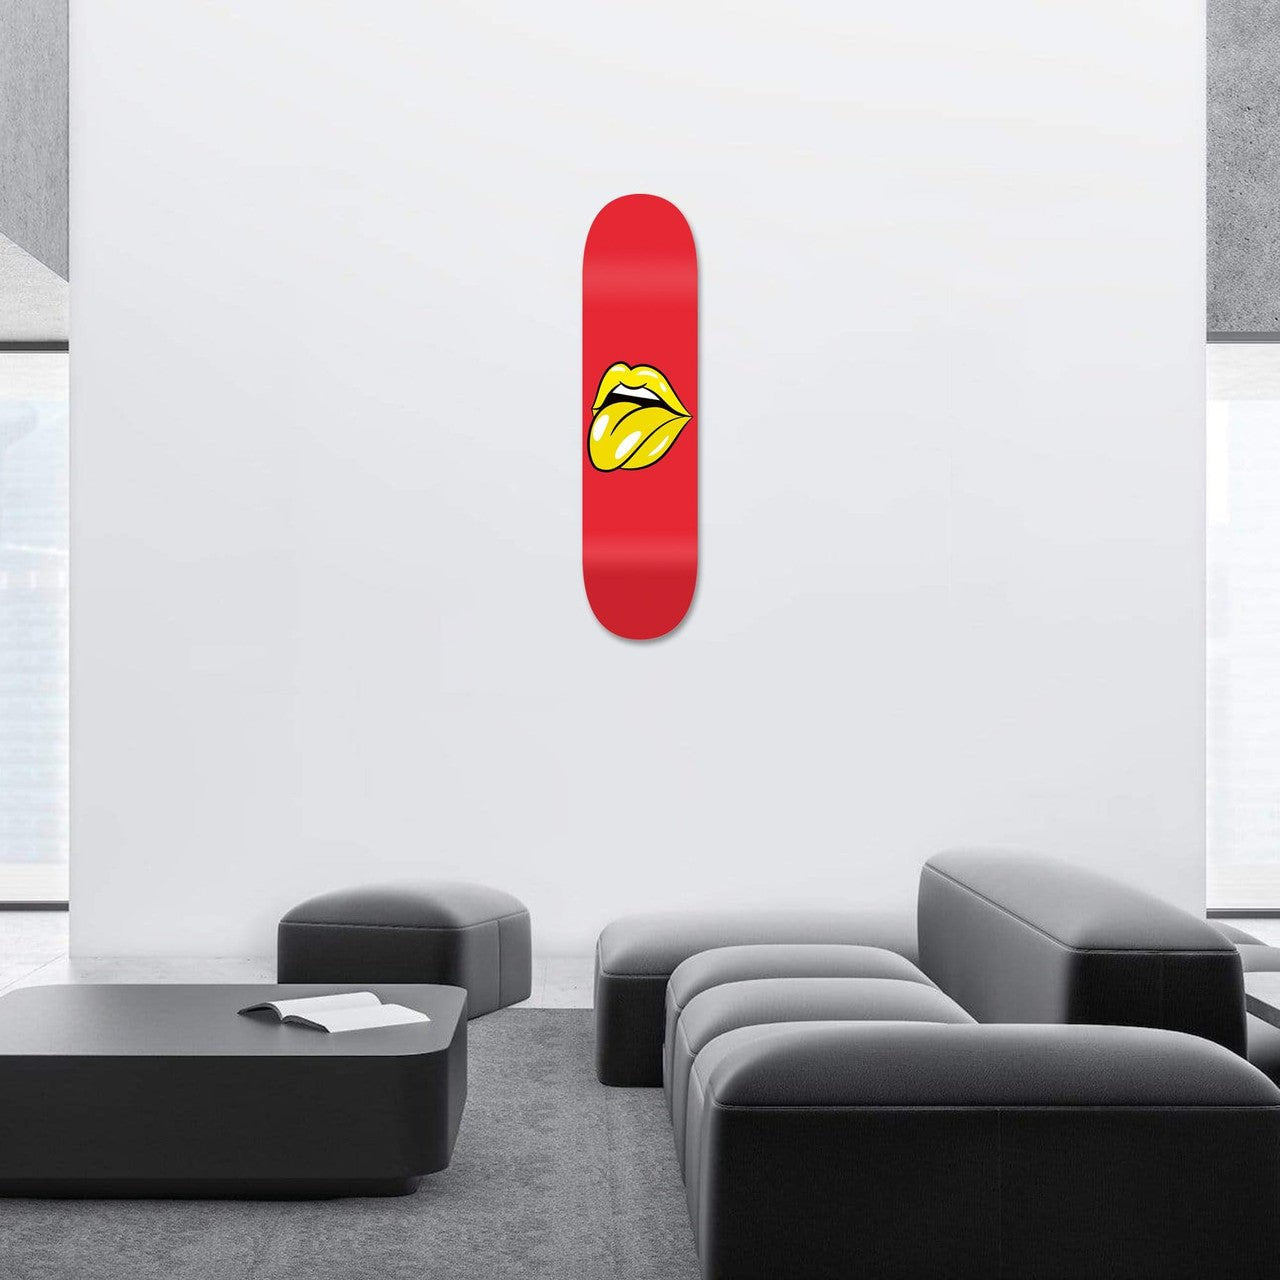 Bundle: "Yellow & Pink & Red Lips" - Skateboard - The Art Lab Acrylic Glass Art - Skateboards, Surfboards & Glass Prints Wall Decor for your Home.